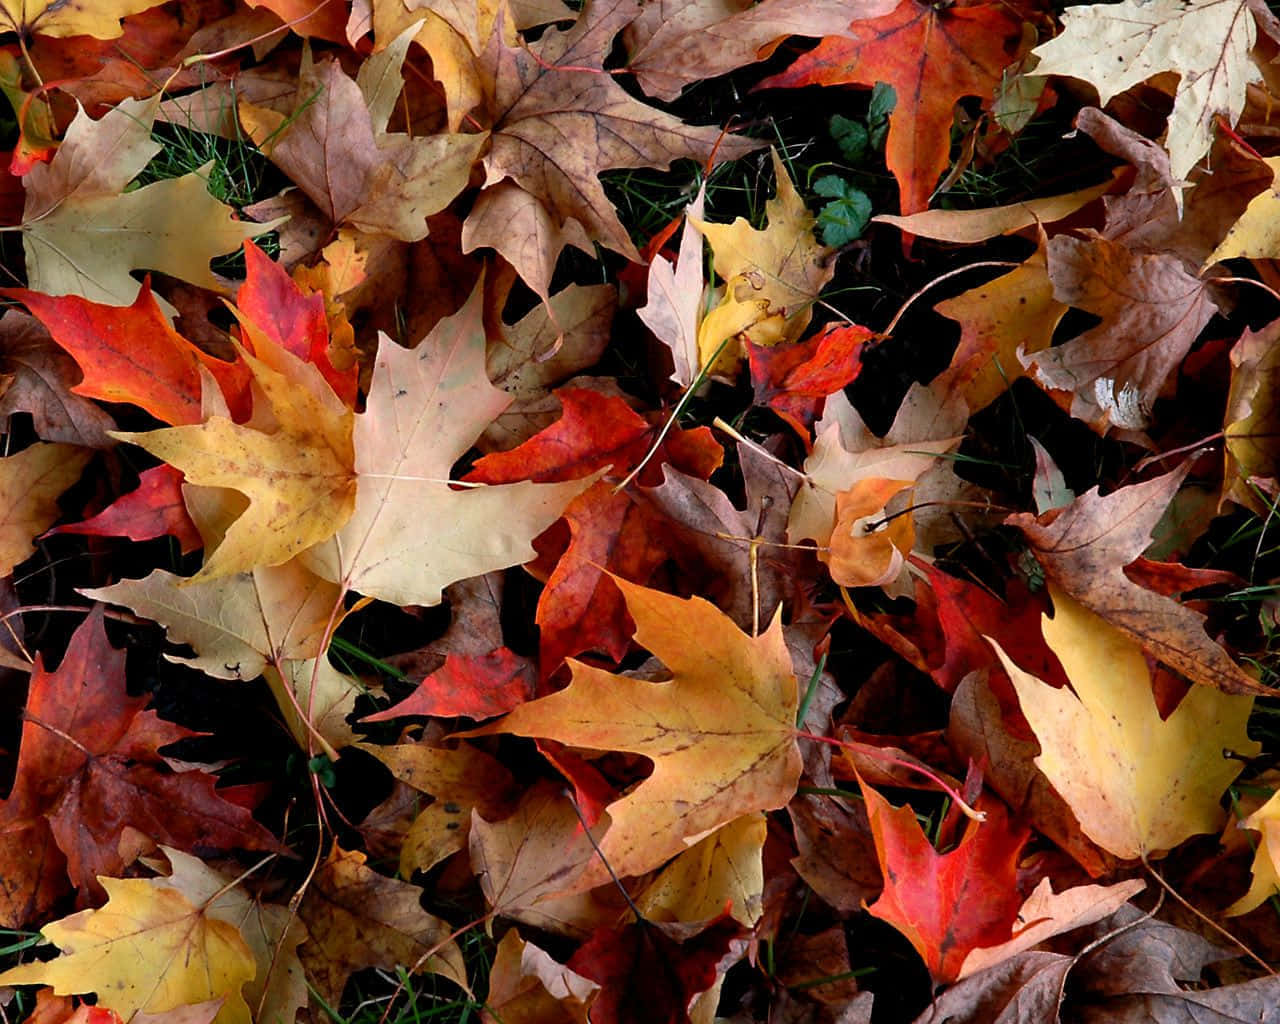 A colorful fall leaf with an artistic pattern of yellow and orange.